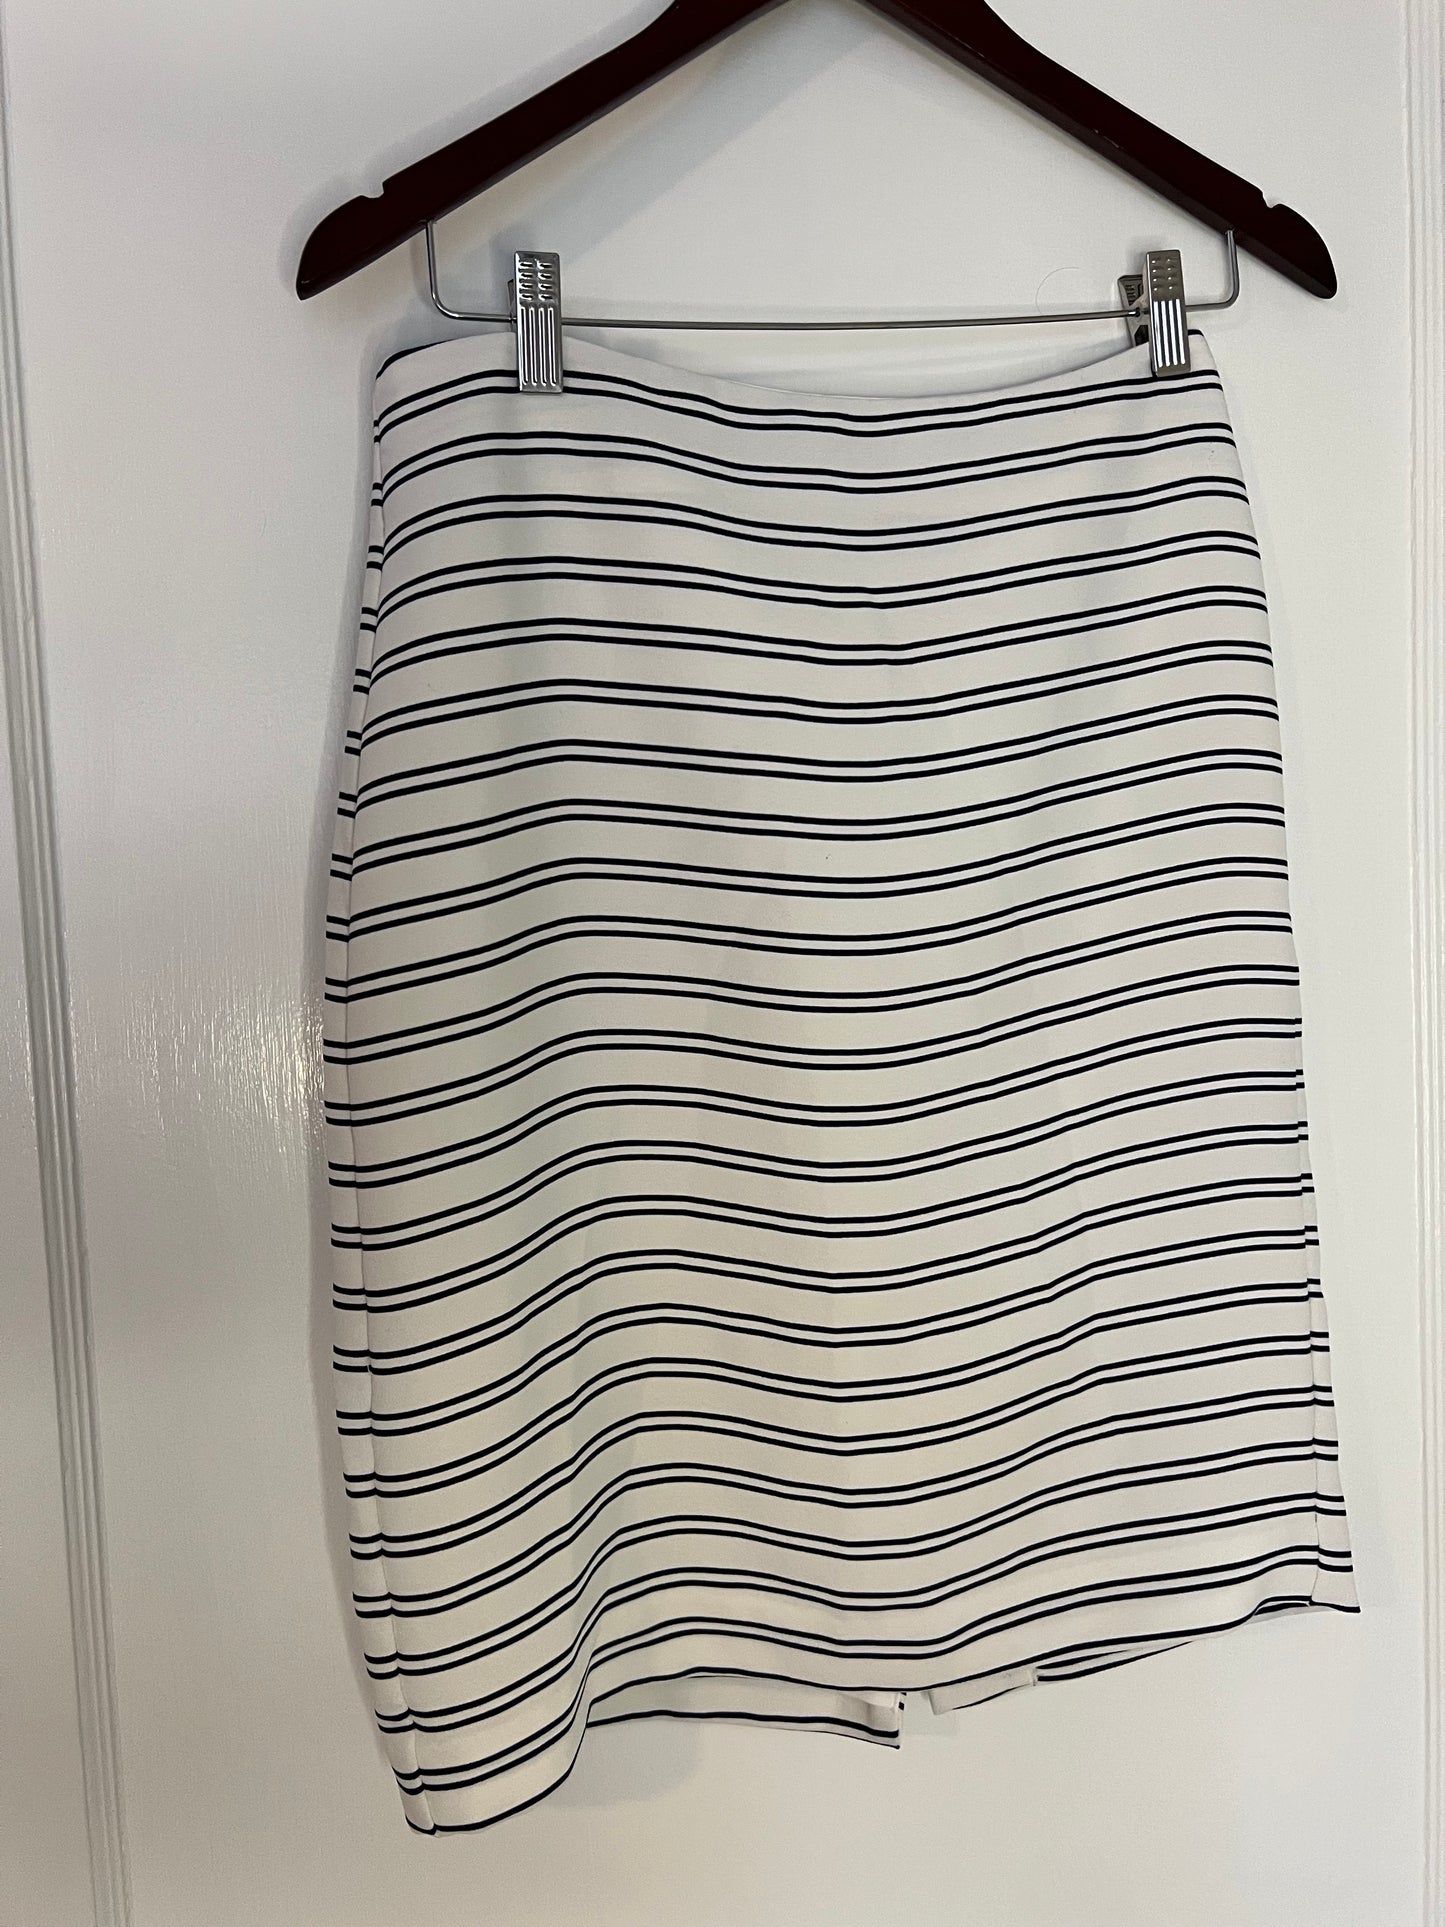 Banana Republic Blue and White Striped Pencil Skirt Size 4P EUC PPU 45208 or Spring Sale